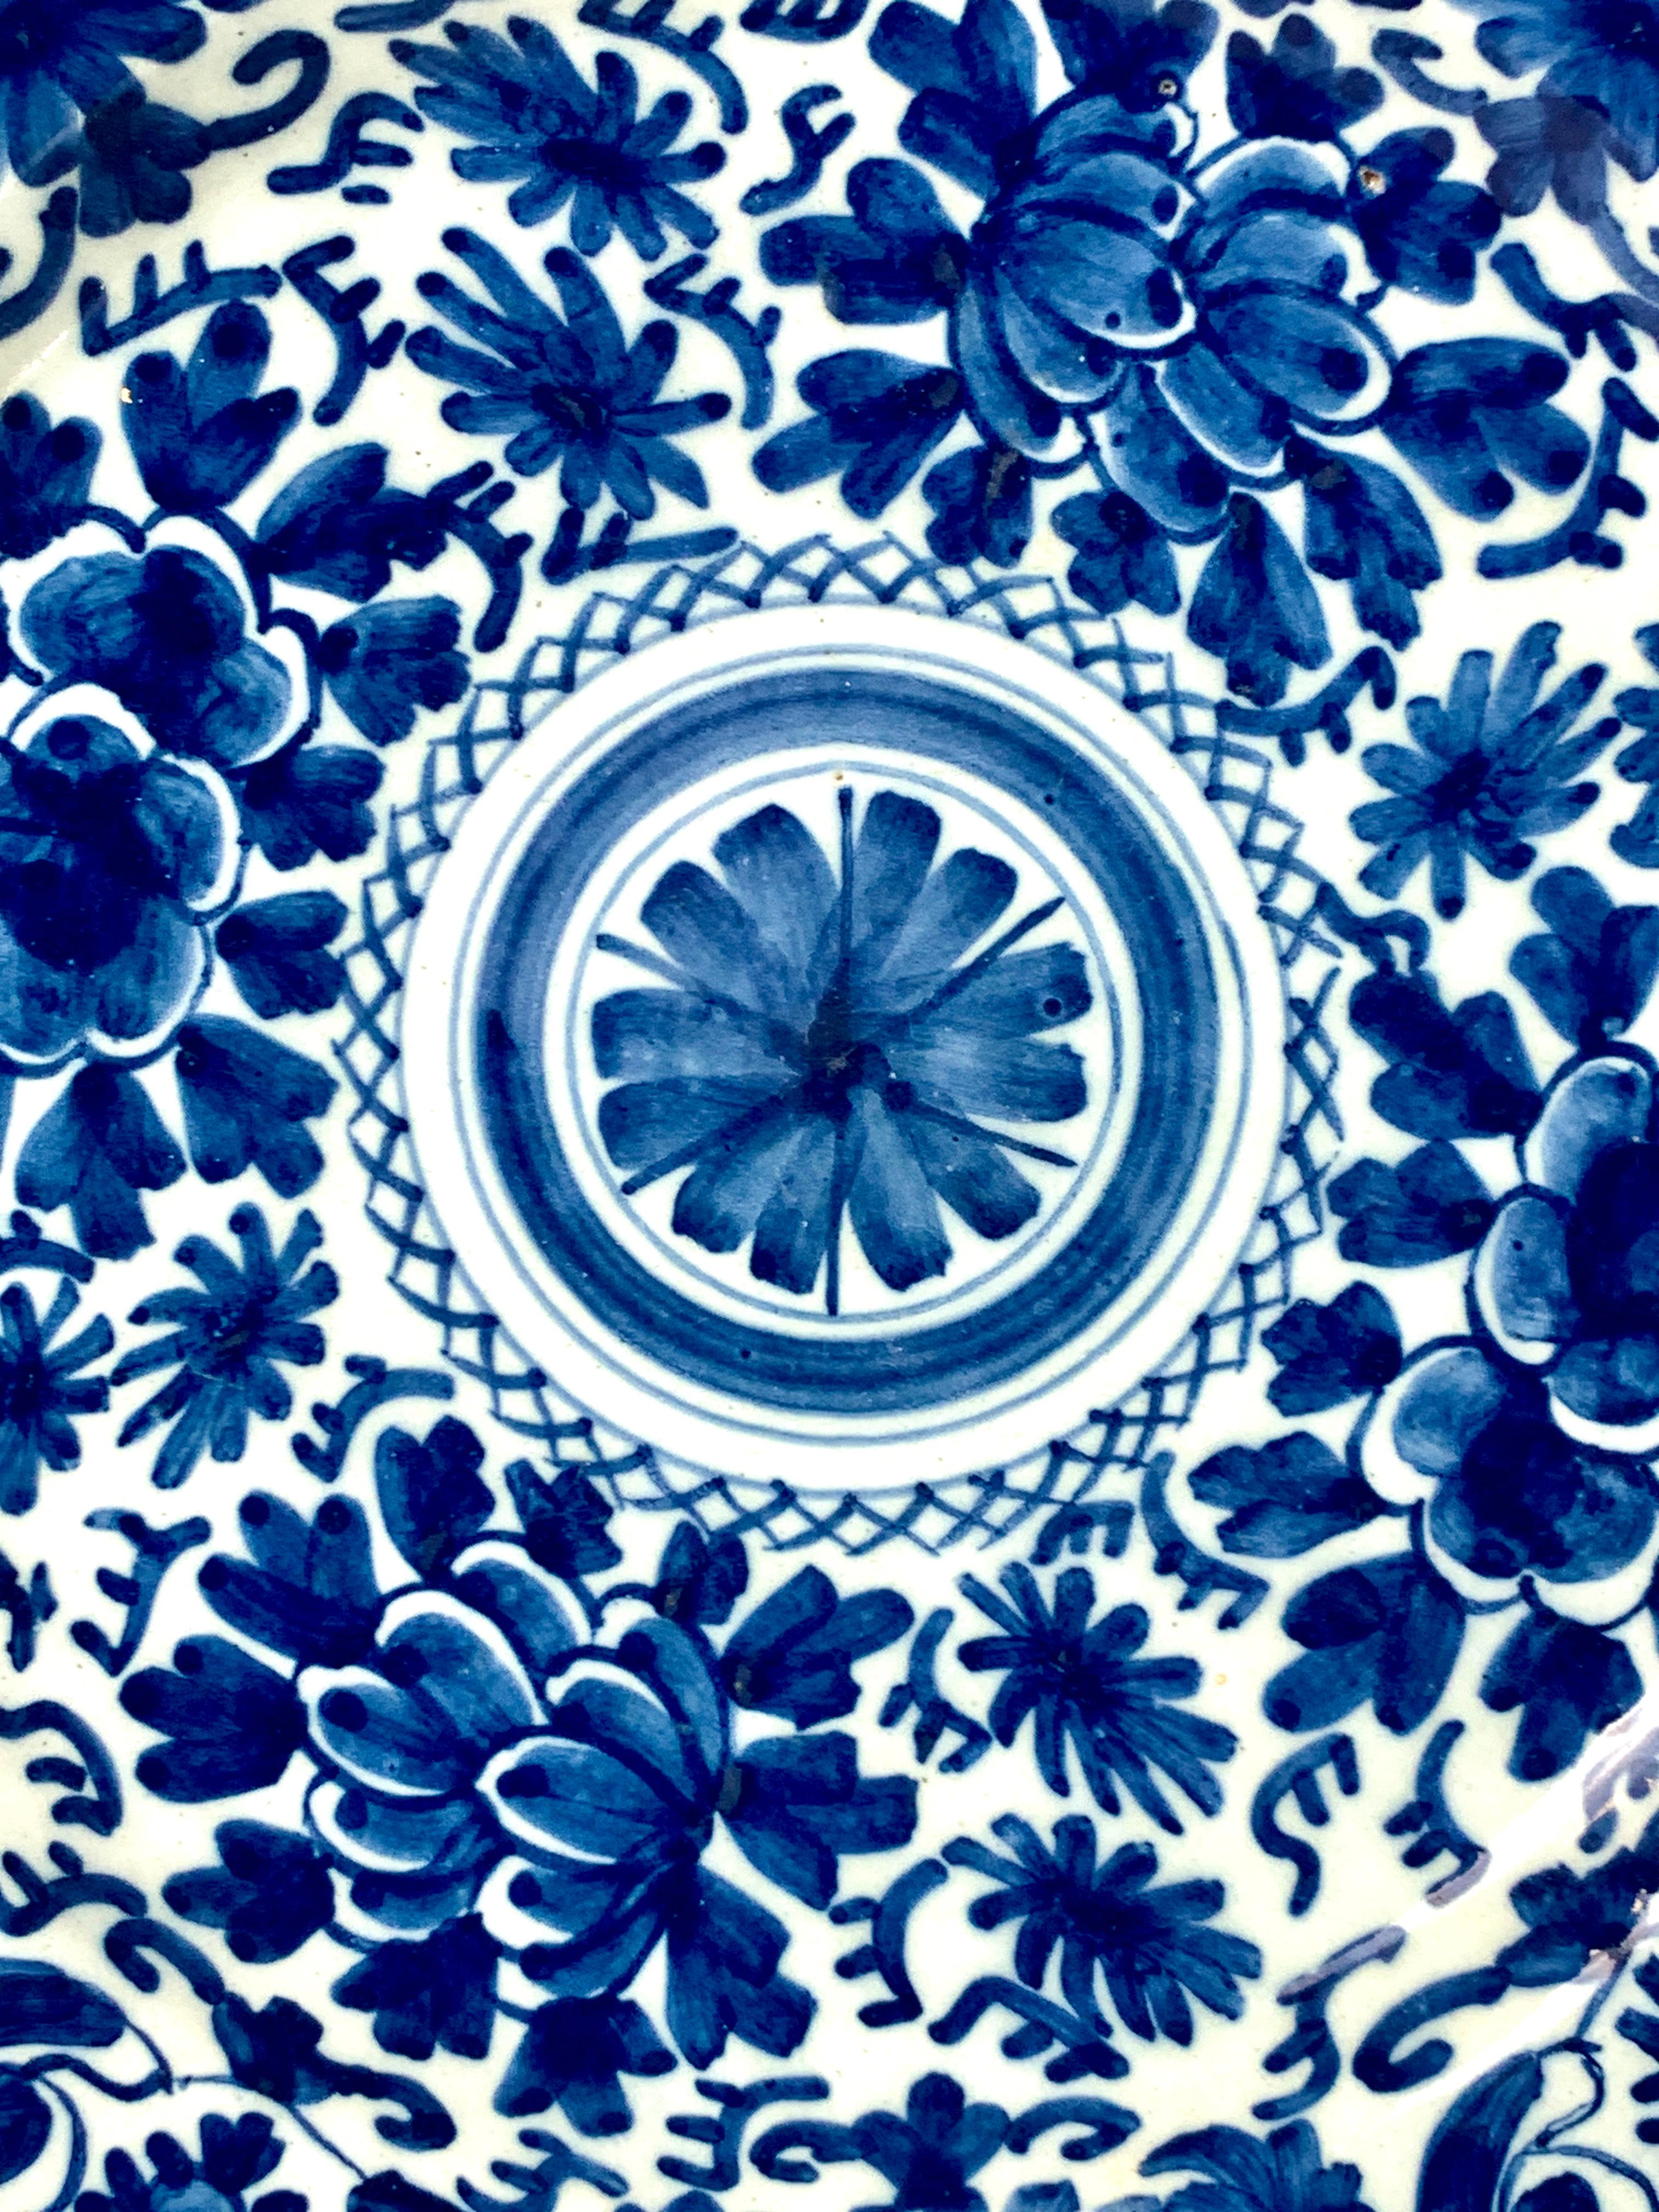 This blue and white Delft charger was hand painted in the Netherlands in the 18th century, circa 1780.
The decoration features a traditional Dutch Delft design of scrolling vines and tulips around a central medallion.
The charger is painted in an